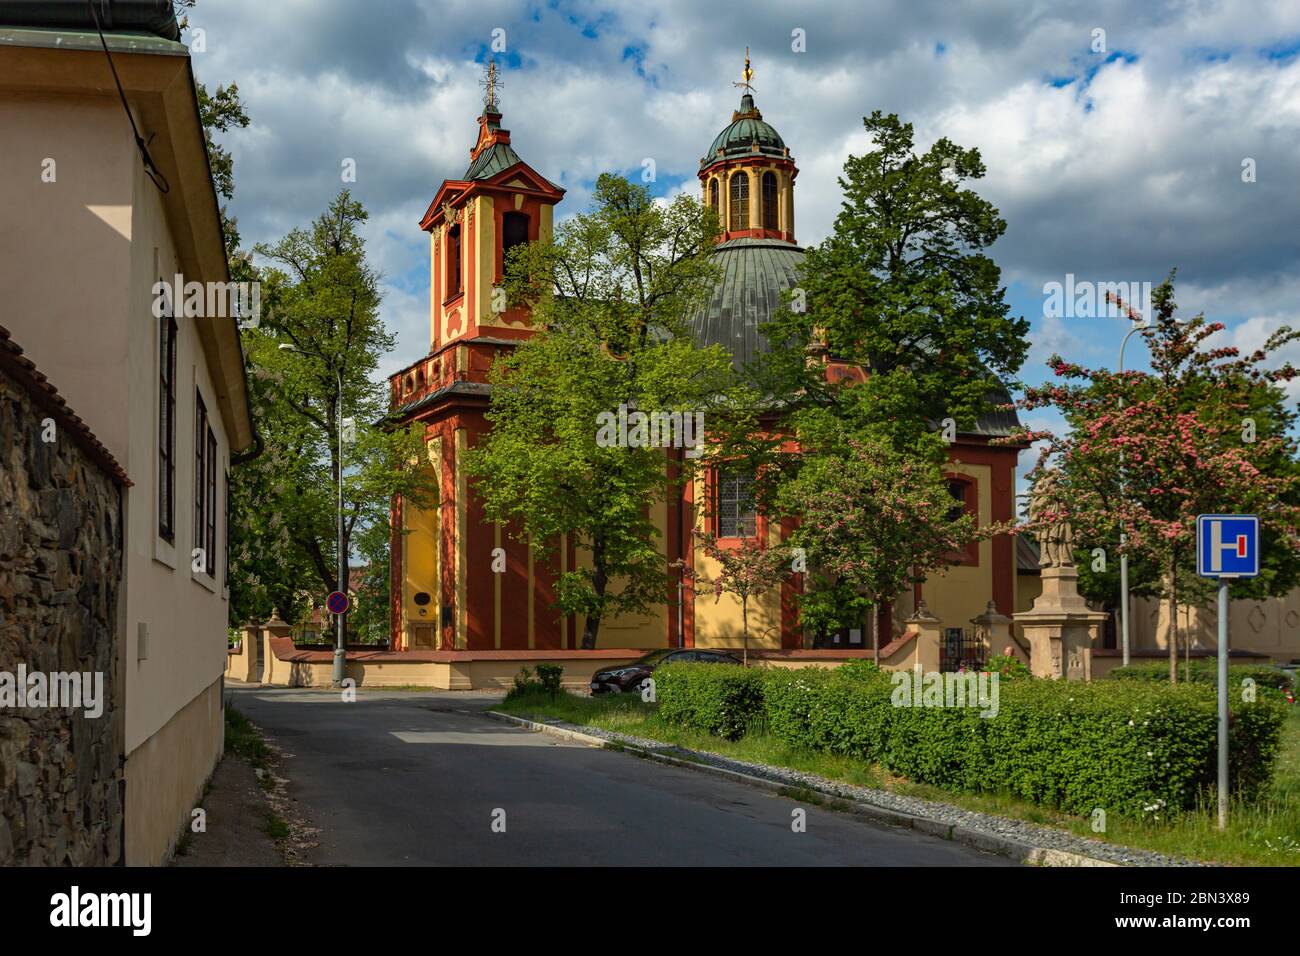 Kunratice, Prague / Czech Republic - May 6 2020: The baroque church of St James the Great with red and yellow facade surrounded with green trees. Stock Photo